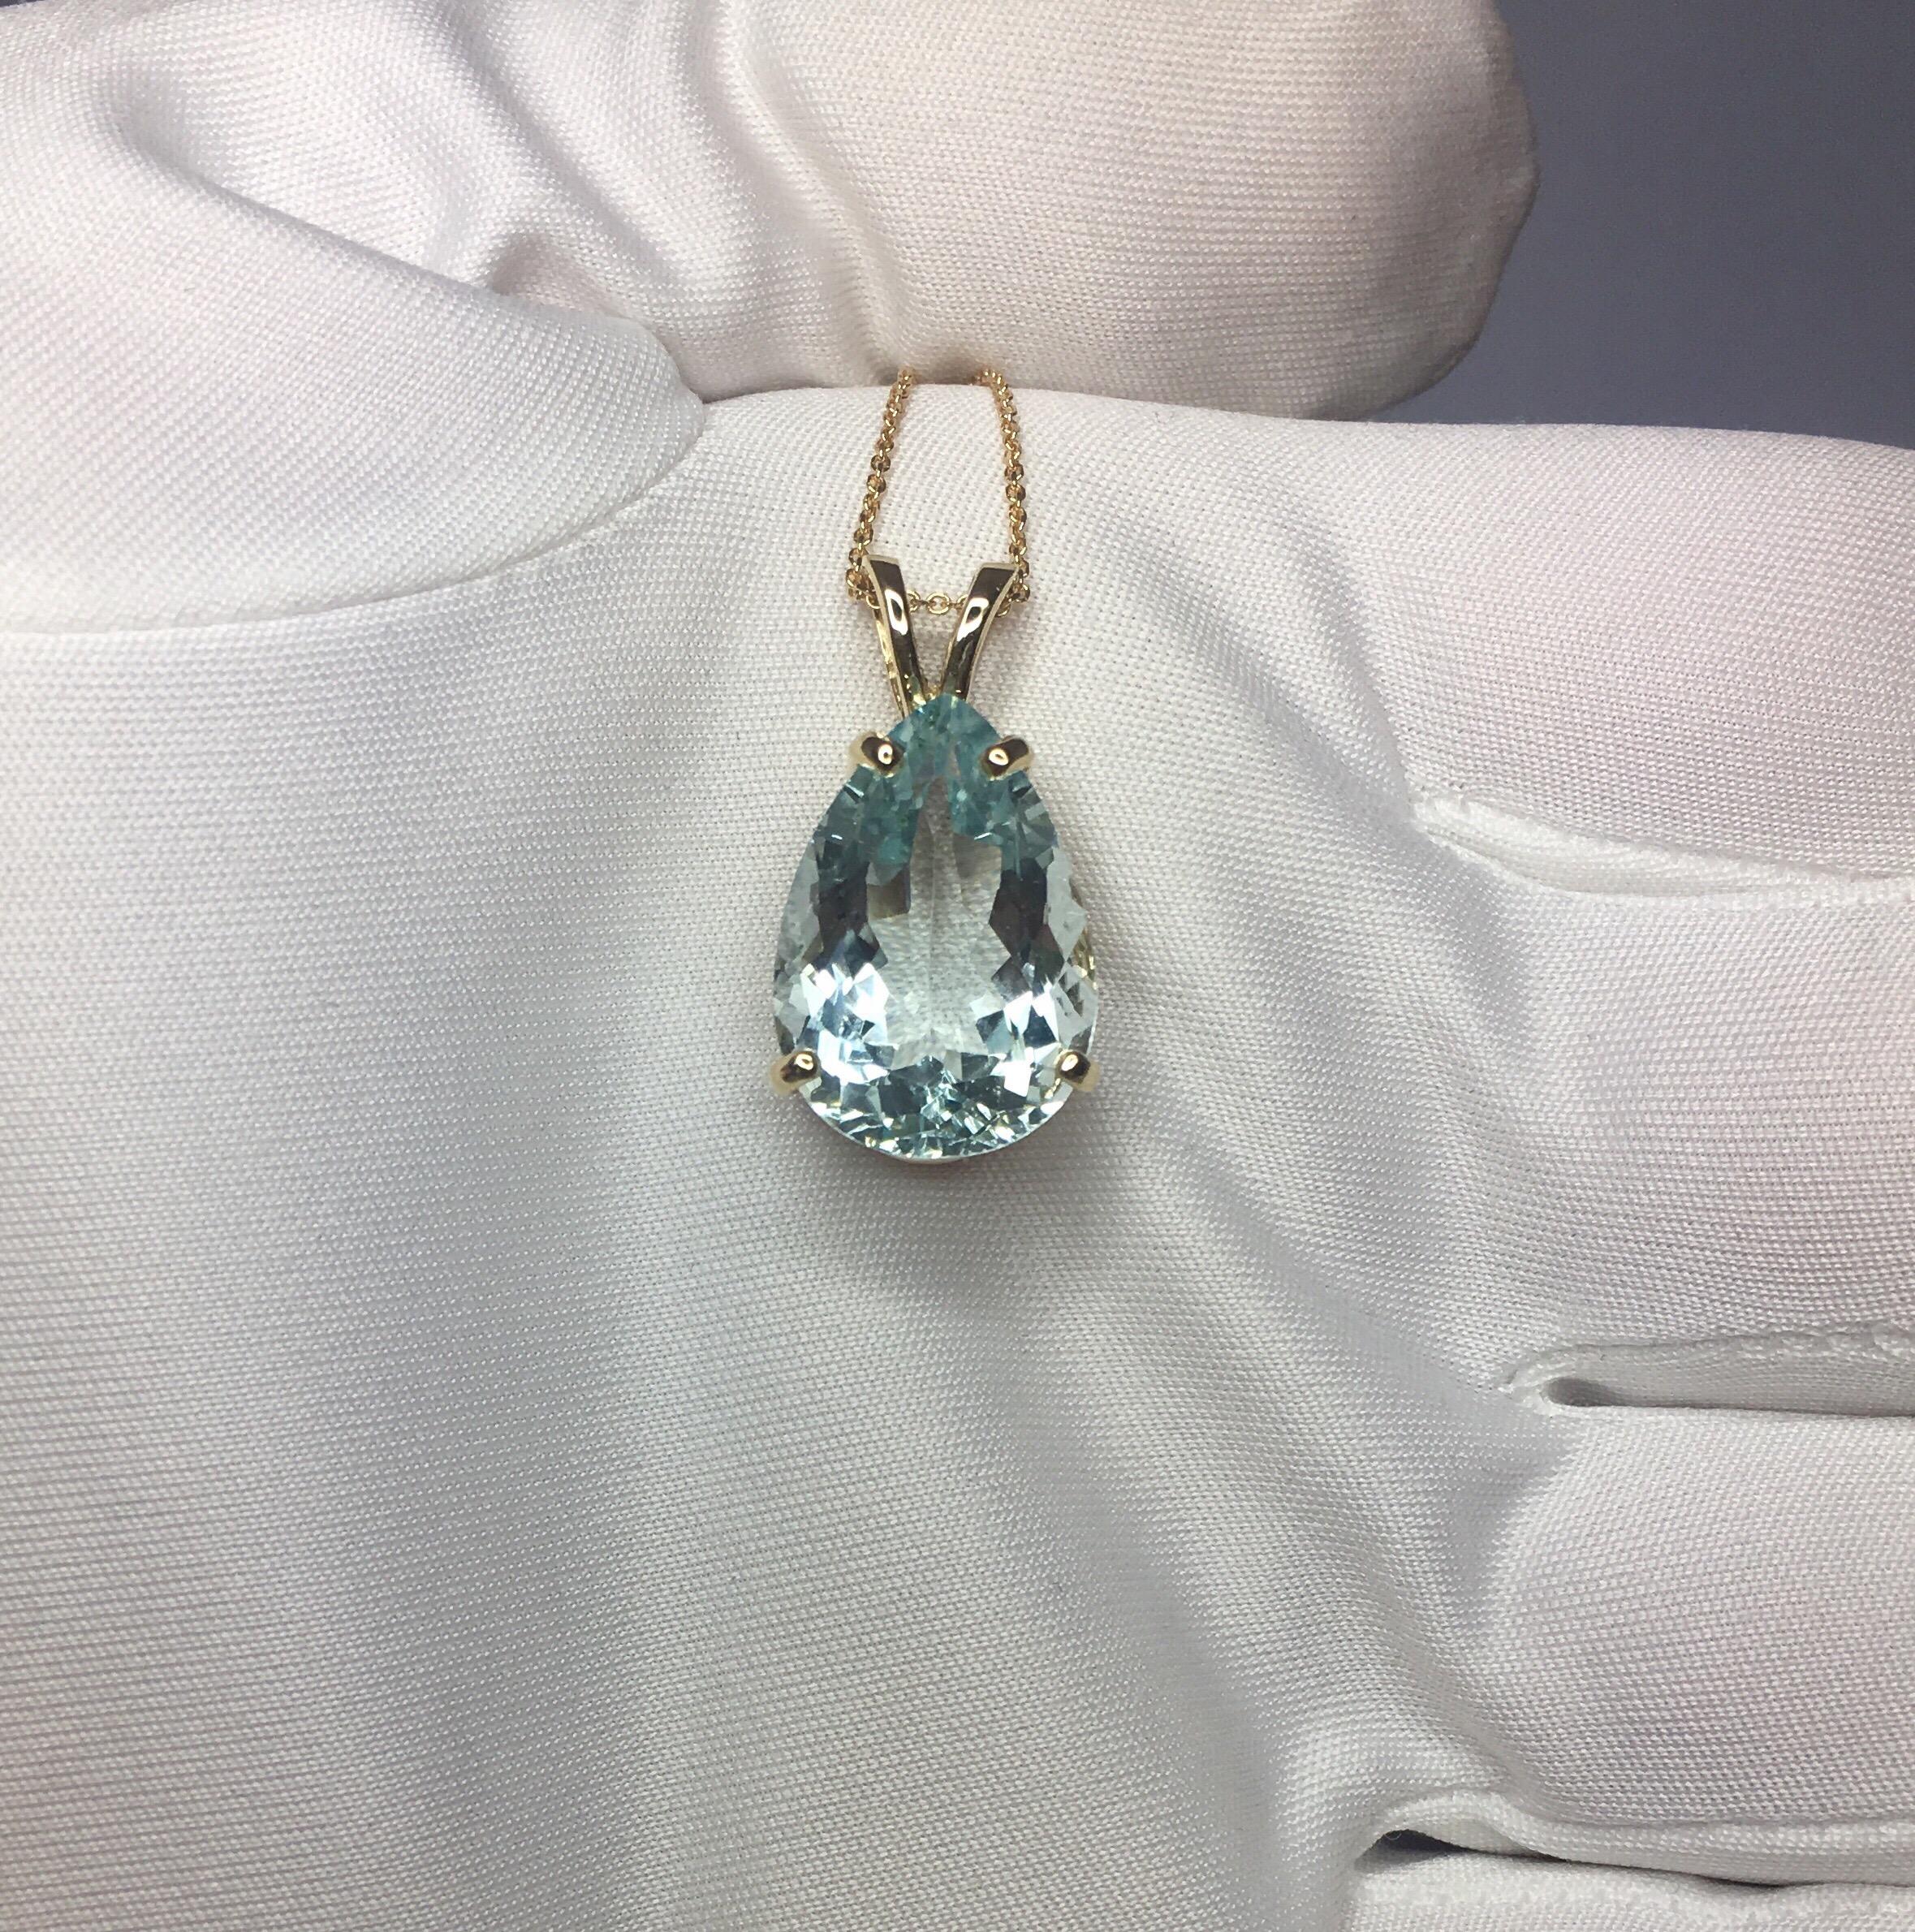 Very large 8.85 carat blue Aquamarine set in a fine 14k yellow gold solitaire pendant.
Very good clarity, clean stone with only some small inclusions visible.

Also has an excellent pear cut showing lots of brightness and light return. Very